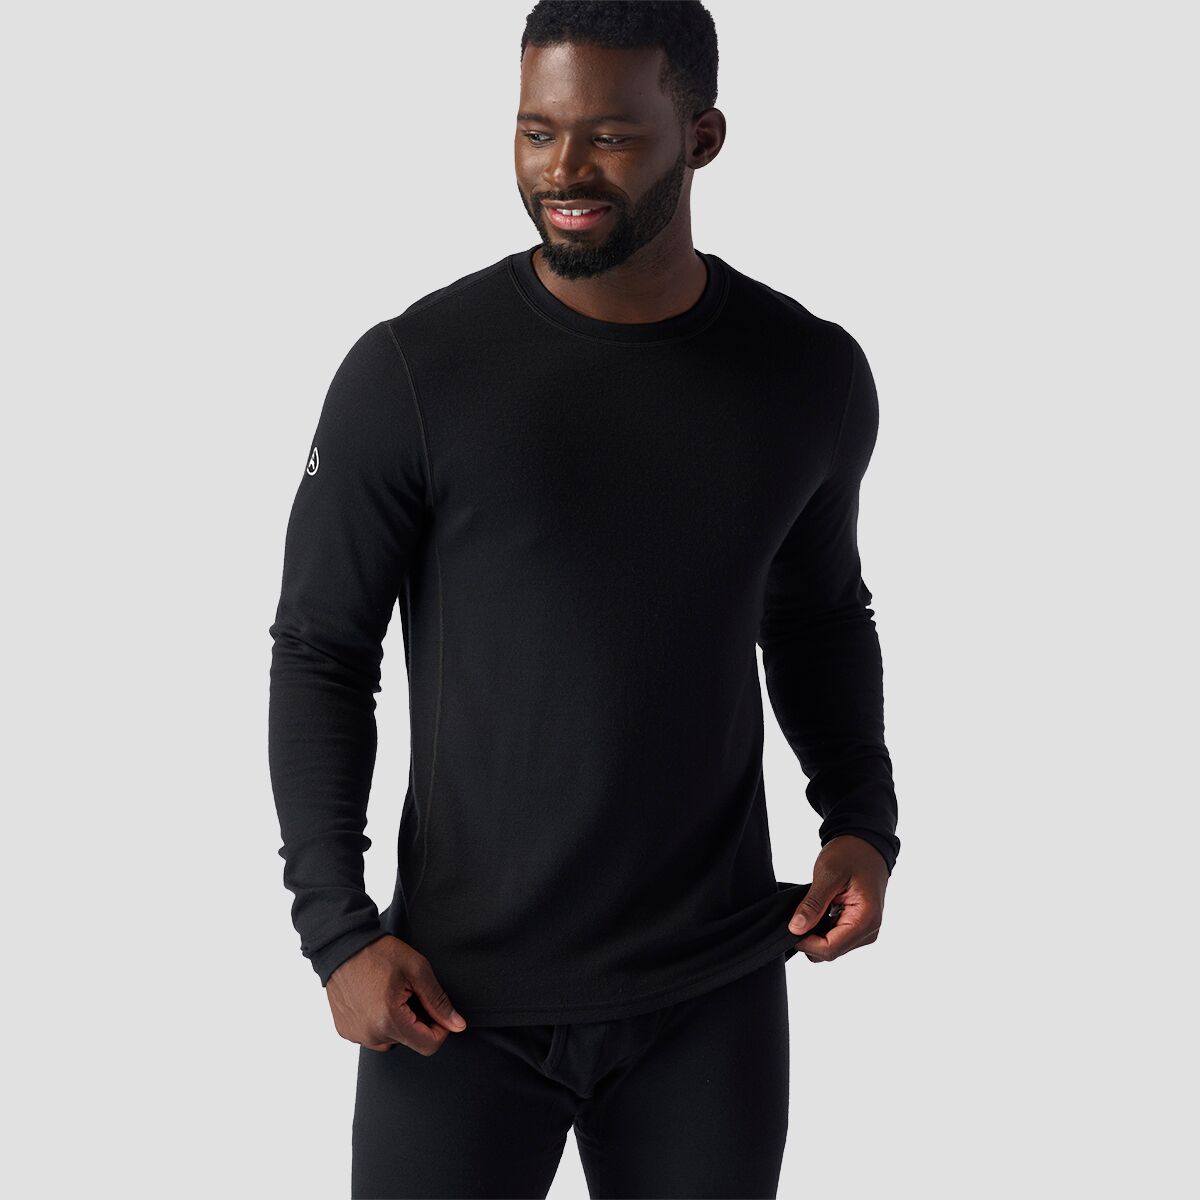 Backcountry Spruces Mid-Weight Merino Baselayer Crew - Men's